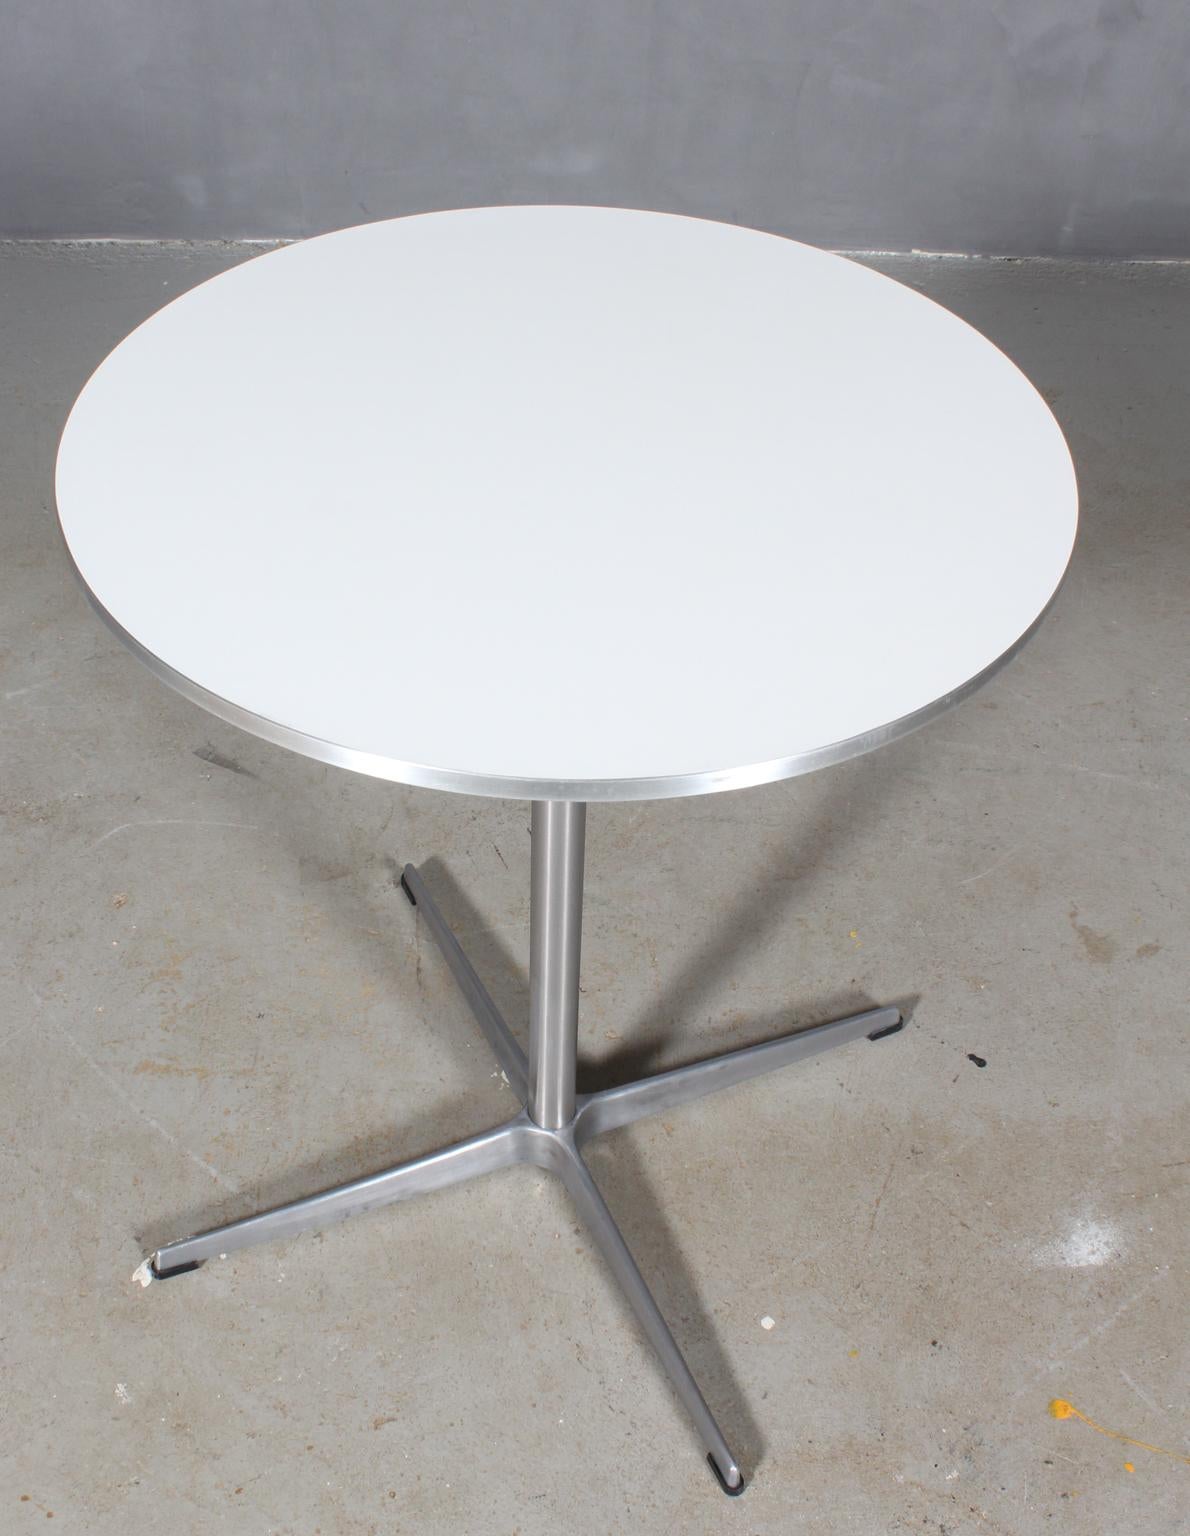 Piet Hein & Arne Jacobsen café / kitchen table with plate of white laminat and aluminium side.

Four star base of aluminium and steel.

Made by Fritz Hansen.